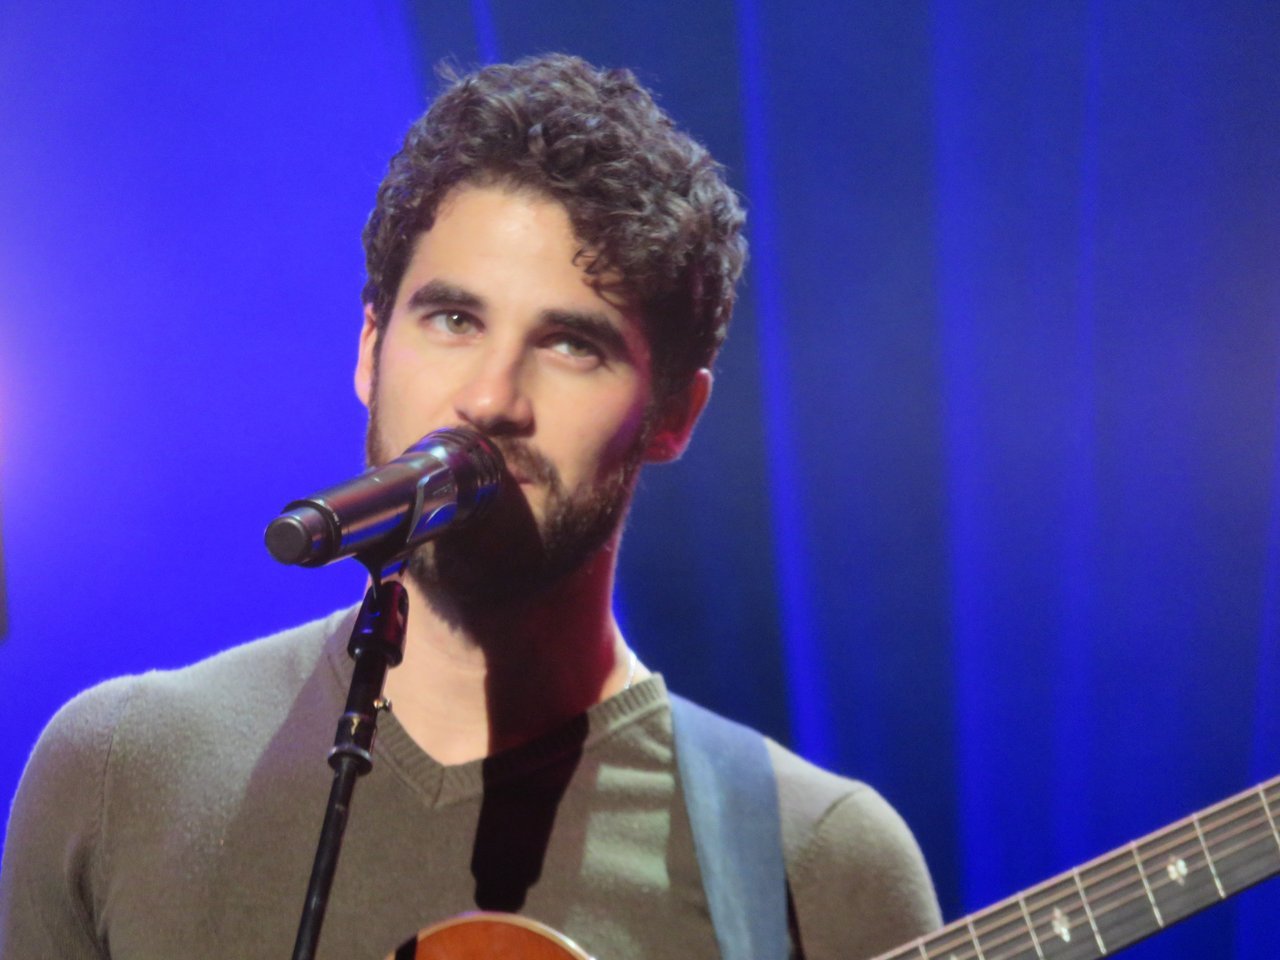 churchkeysmusic - Darren's Concerts and Other Musical Performancs for 2018 - Page 4 Tumblr_pa69oxiWhg1wpi2k2o6_1280